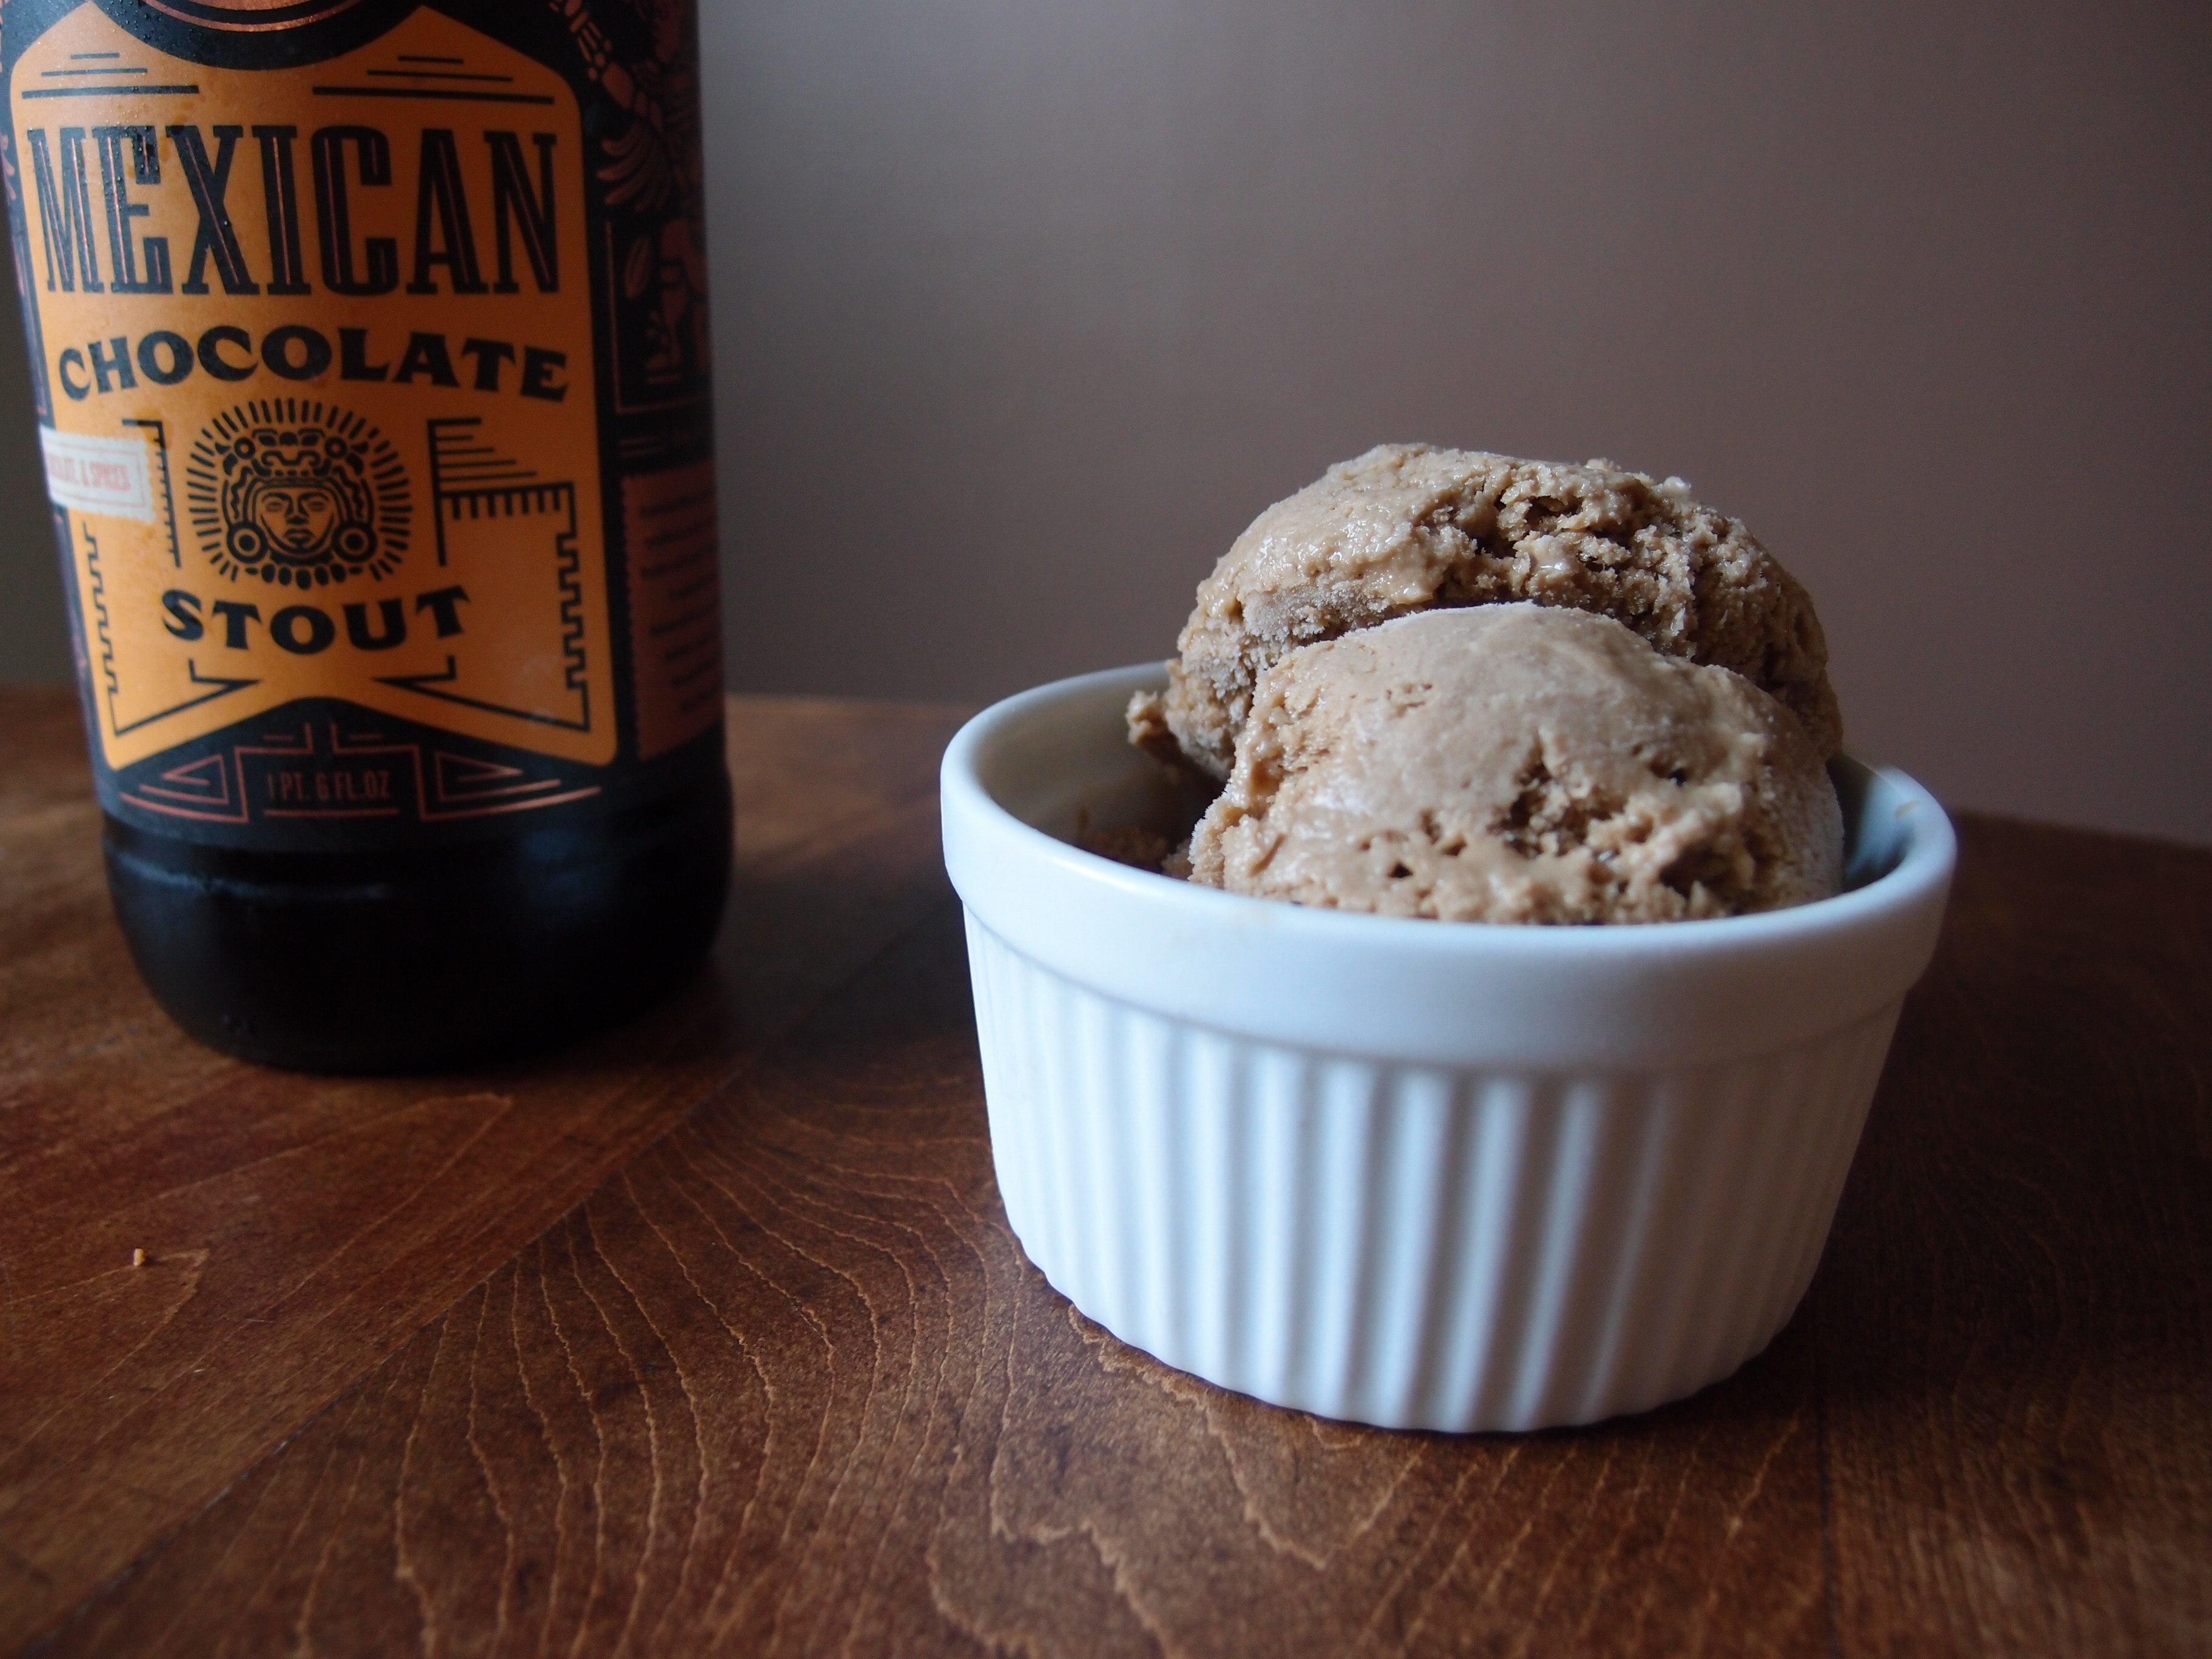 Mexican Chocolate Stout Ice Cream